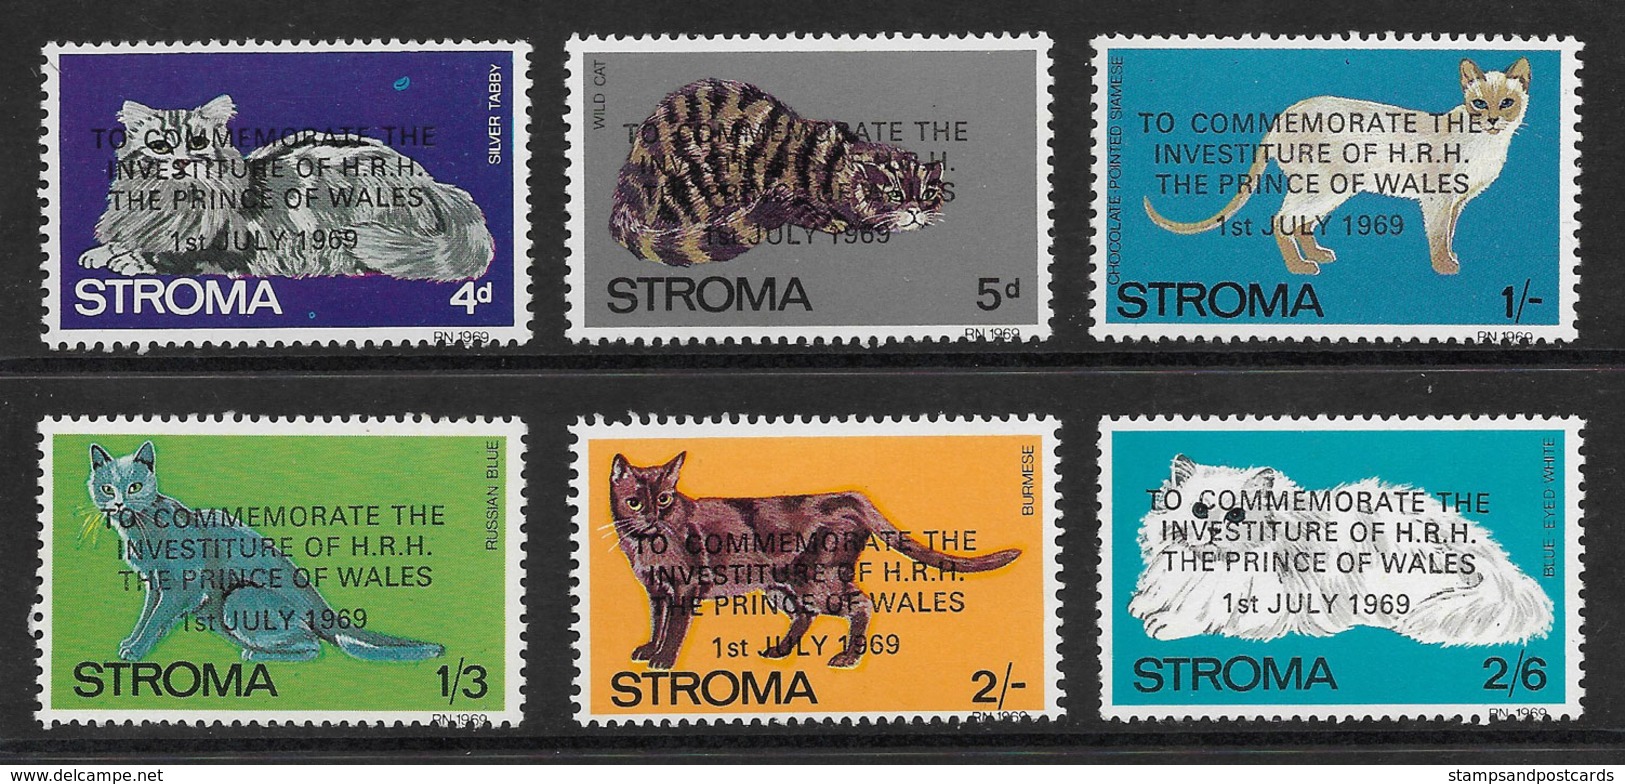 Stroma Chats Emission Locale Surcharge Prince Of Wales 1969 Grande-Bretagne ** Stroma Cats Overprint Local GB Issue ** - Local Issues